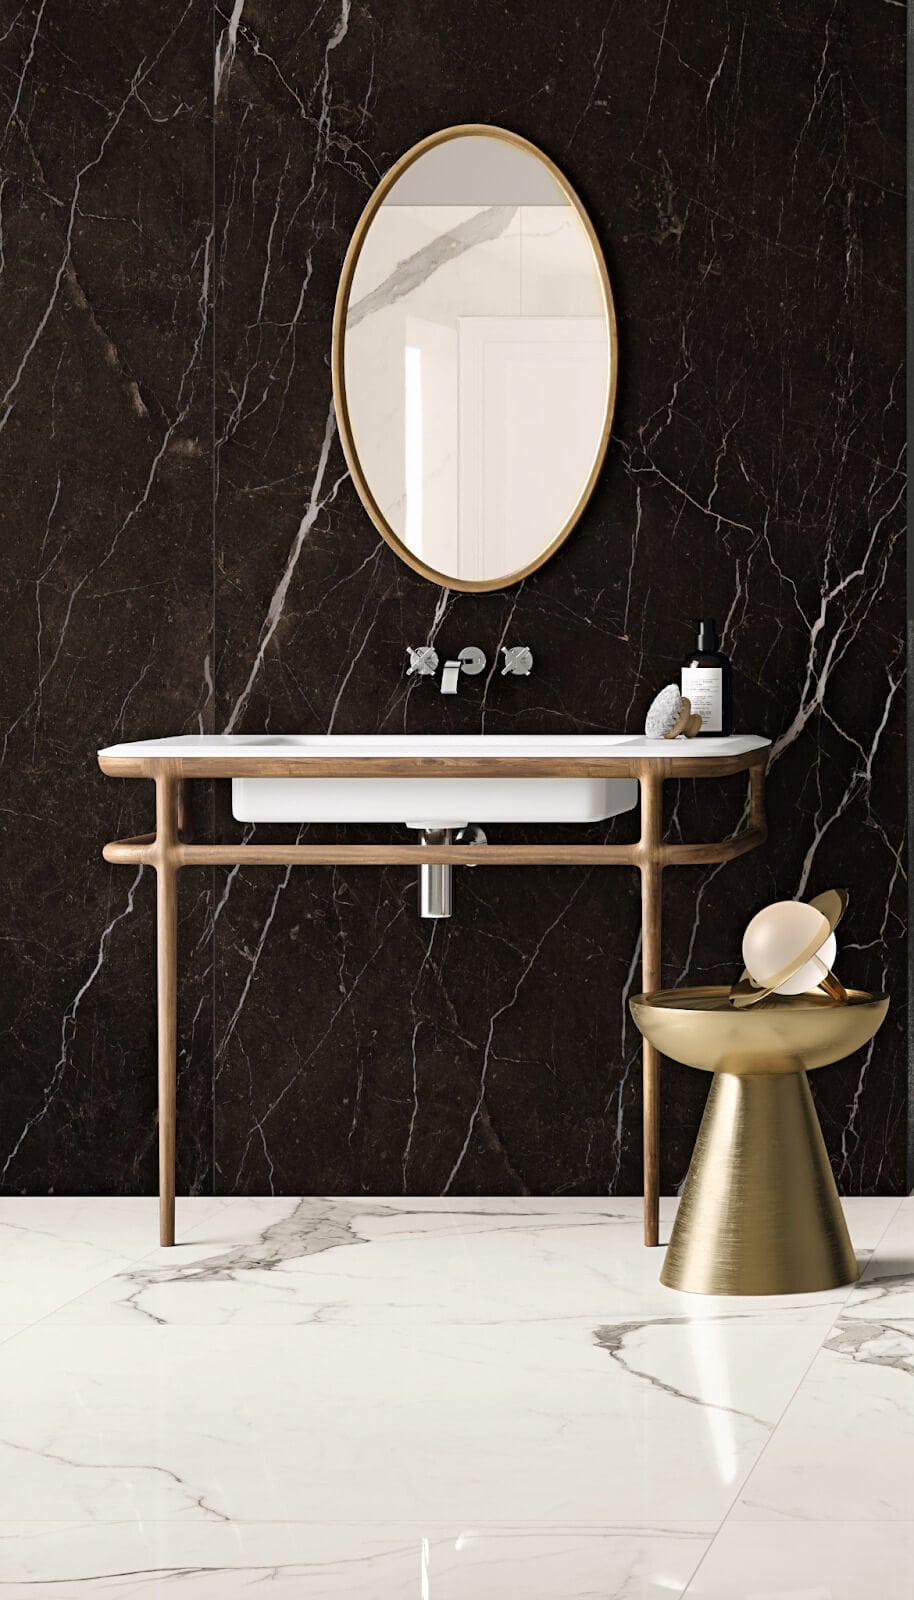 Black and White Tile Powder Room wall in a marble look